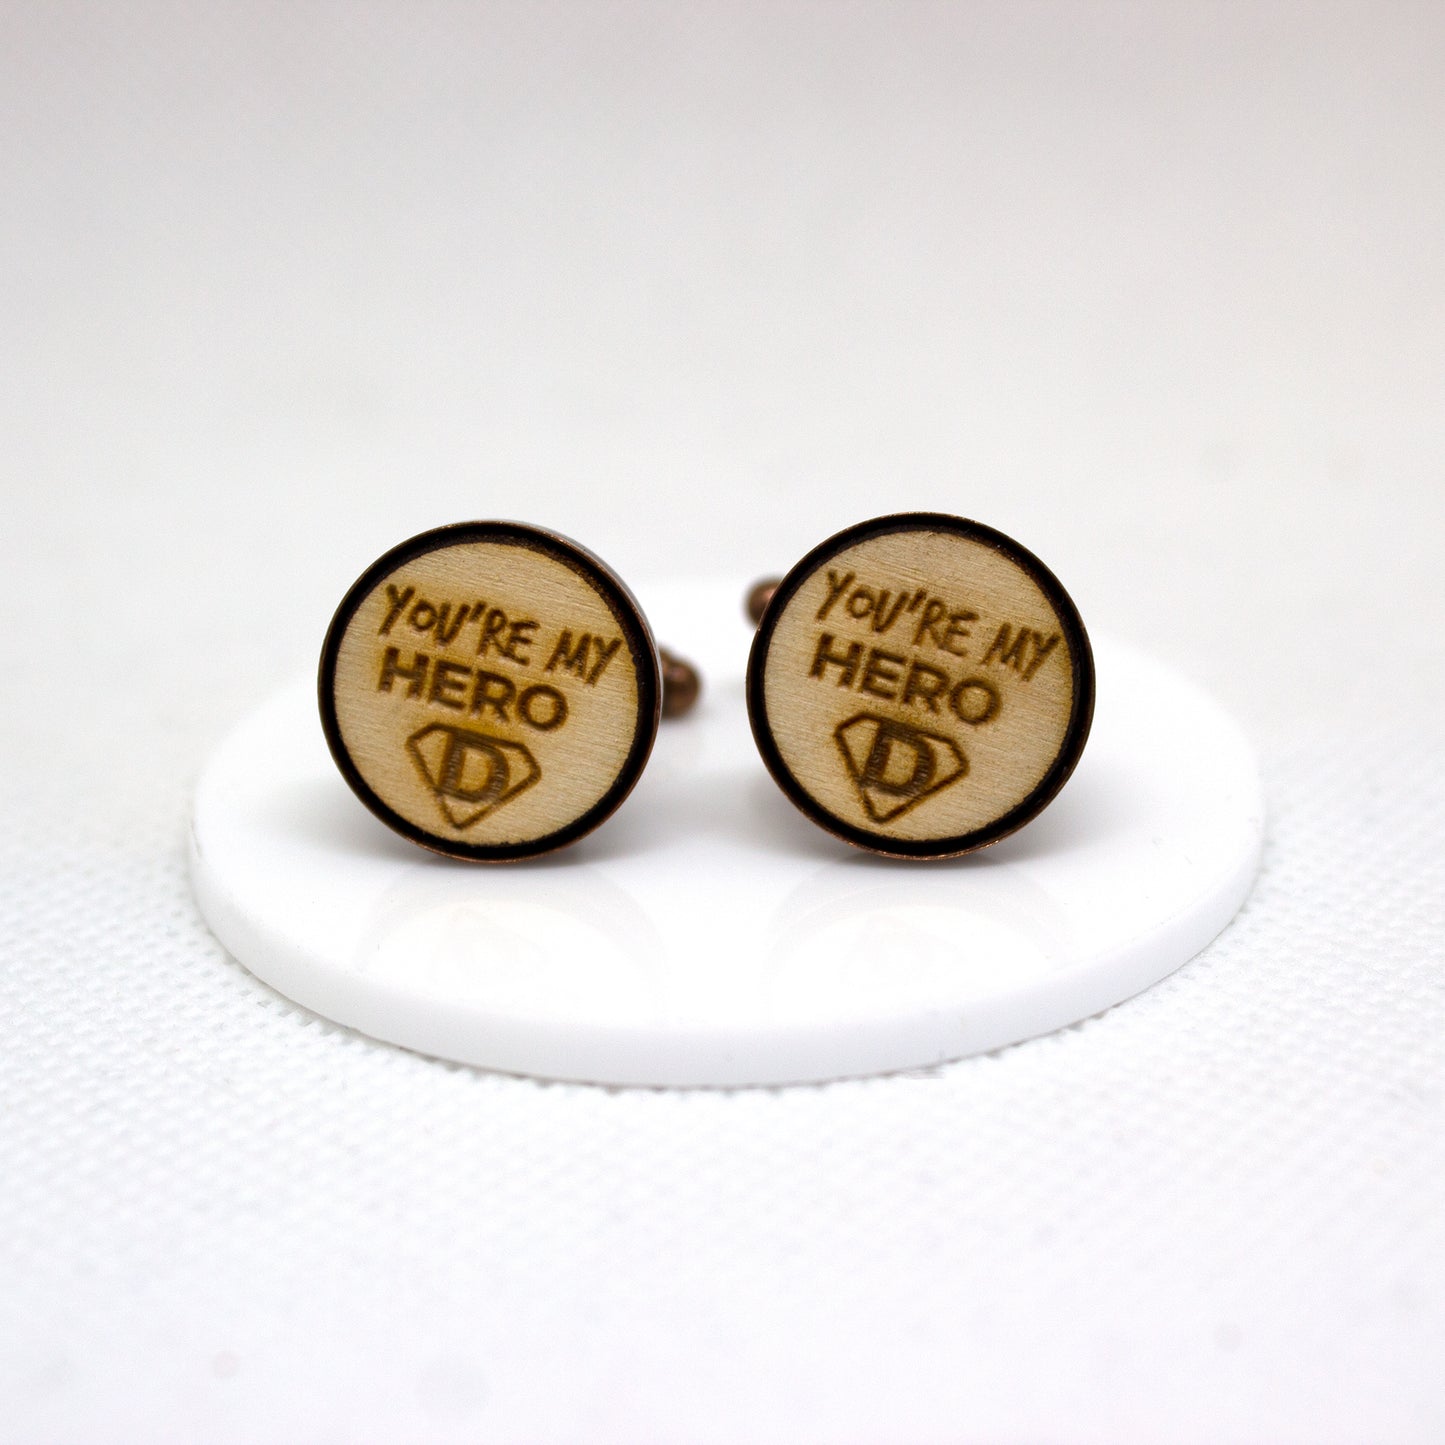 My Hero Cufflinks, Super Dad, Father's Day Gifts, Gifts for Him